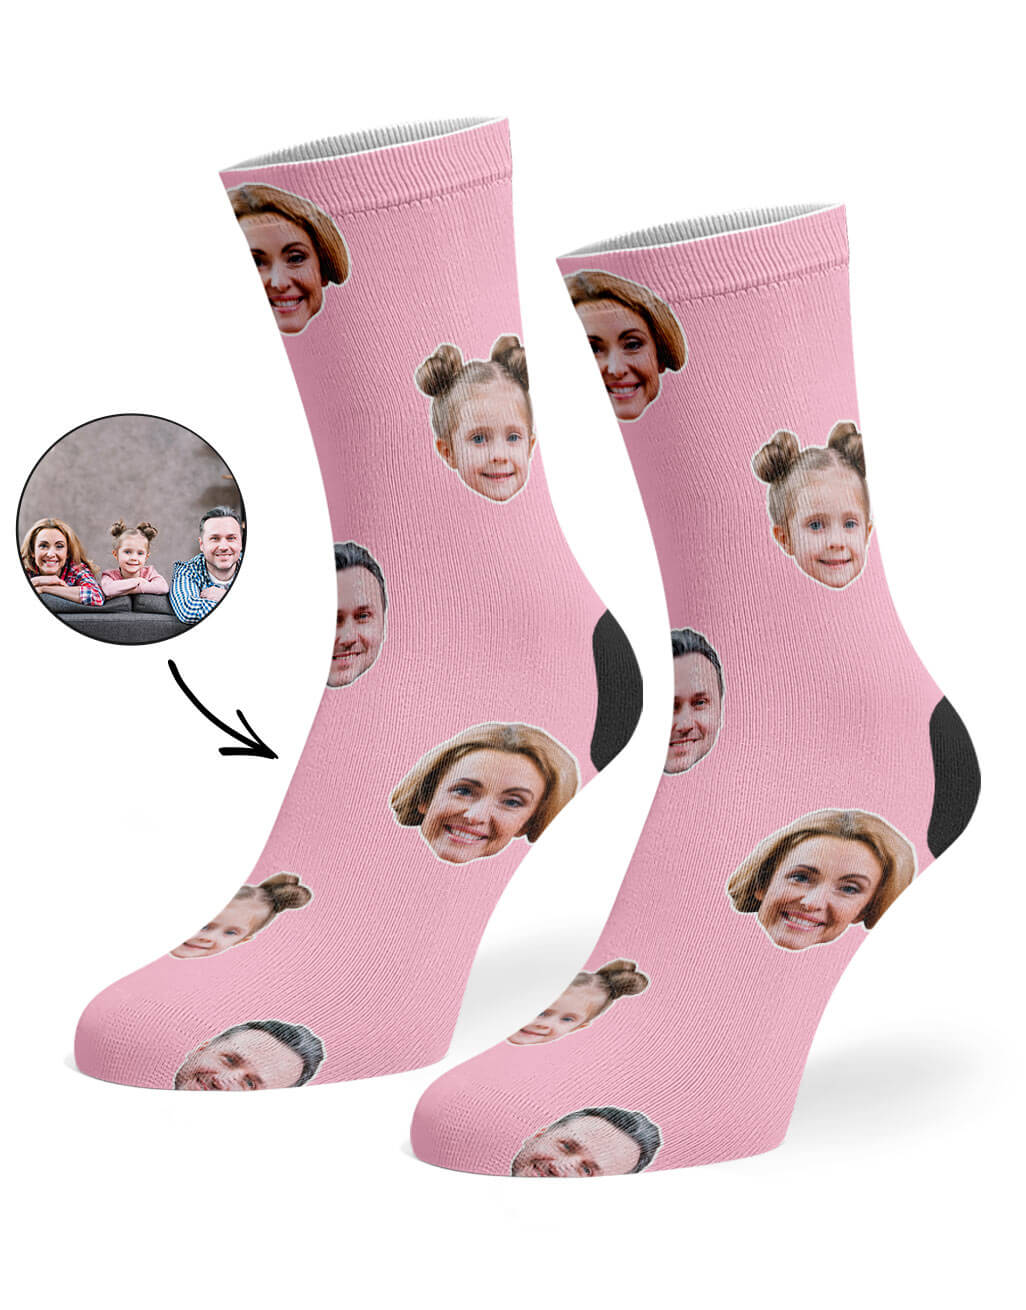 personalized socks featuring your photo